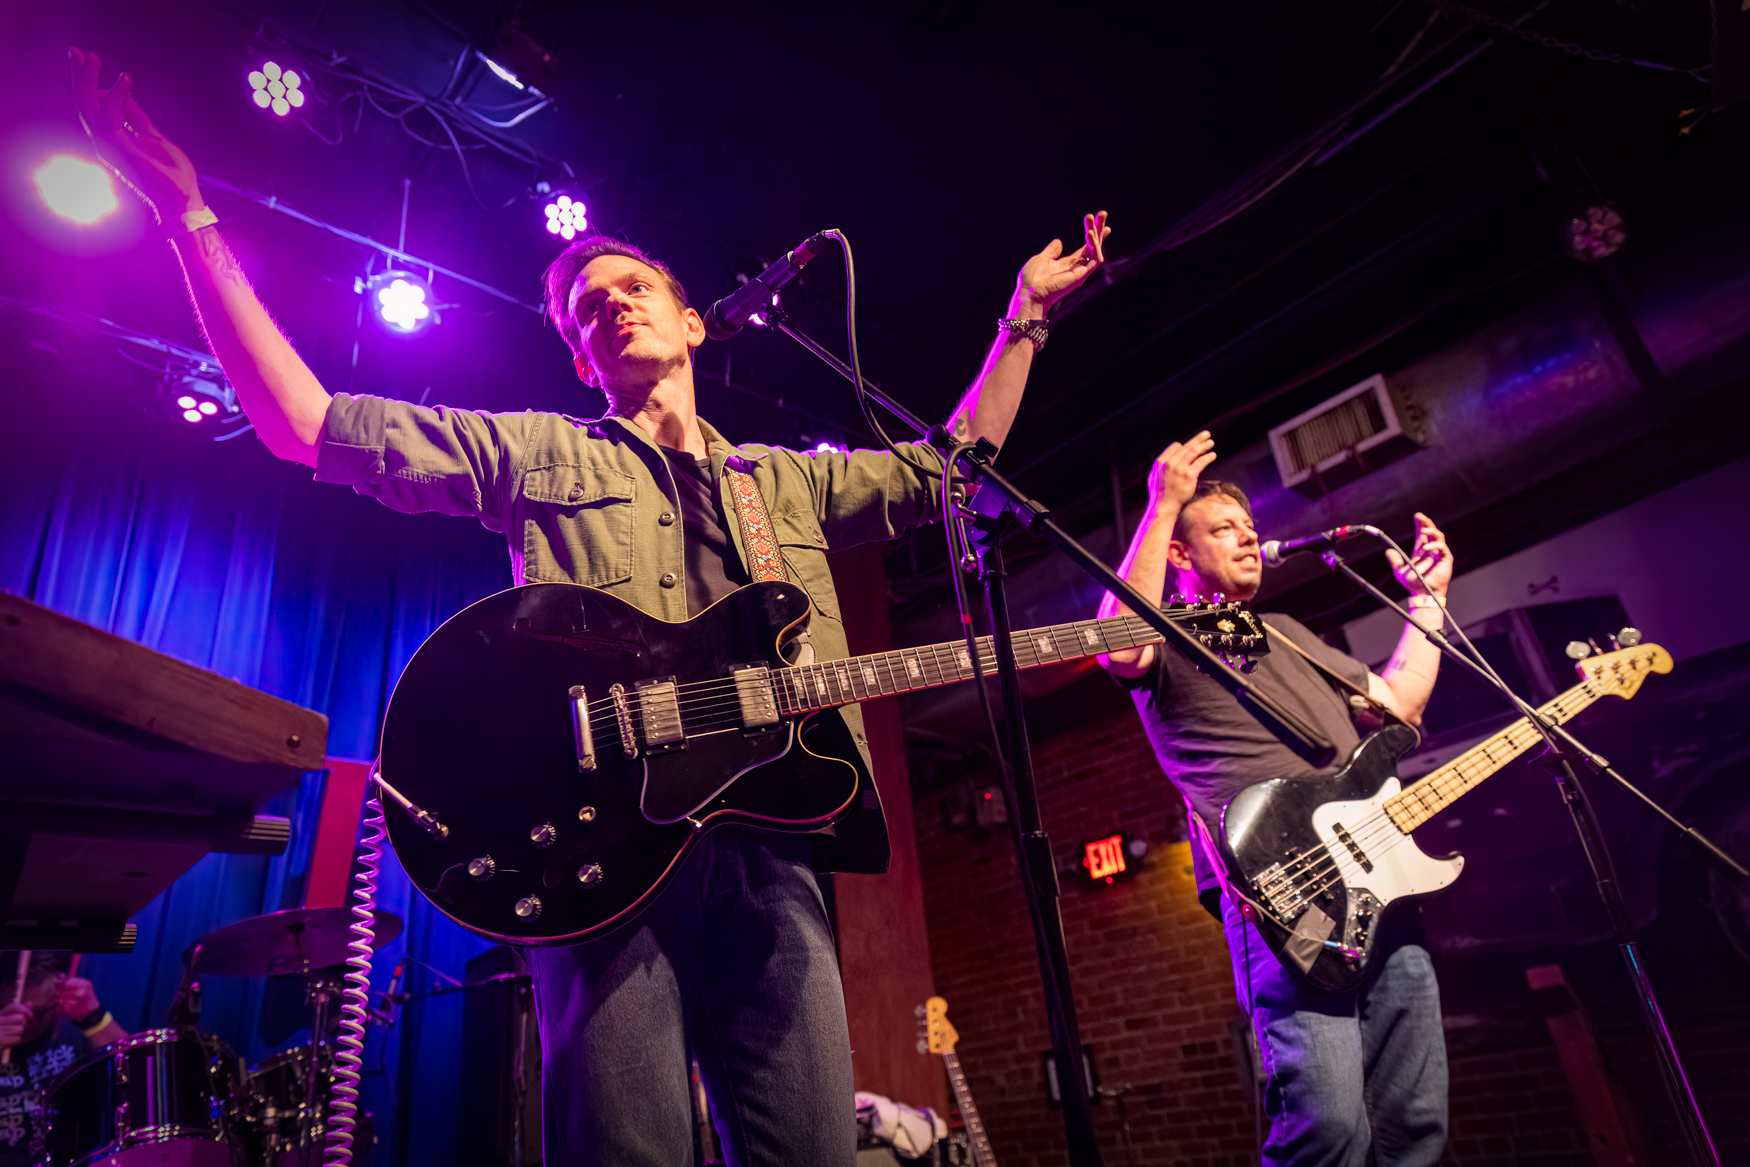 The Divorce at The Tractor Tavern at the TIG 20th Anniversary Show. Photo by Alley Rutzel